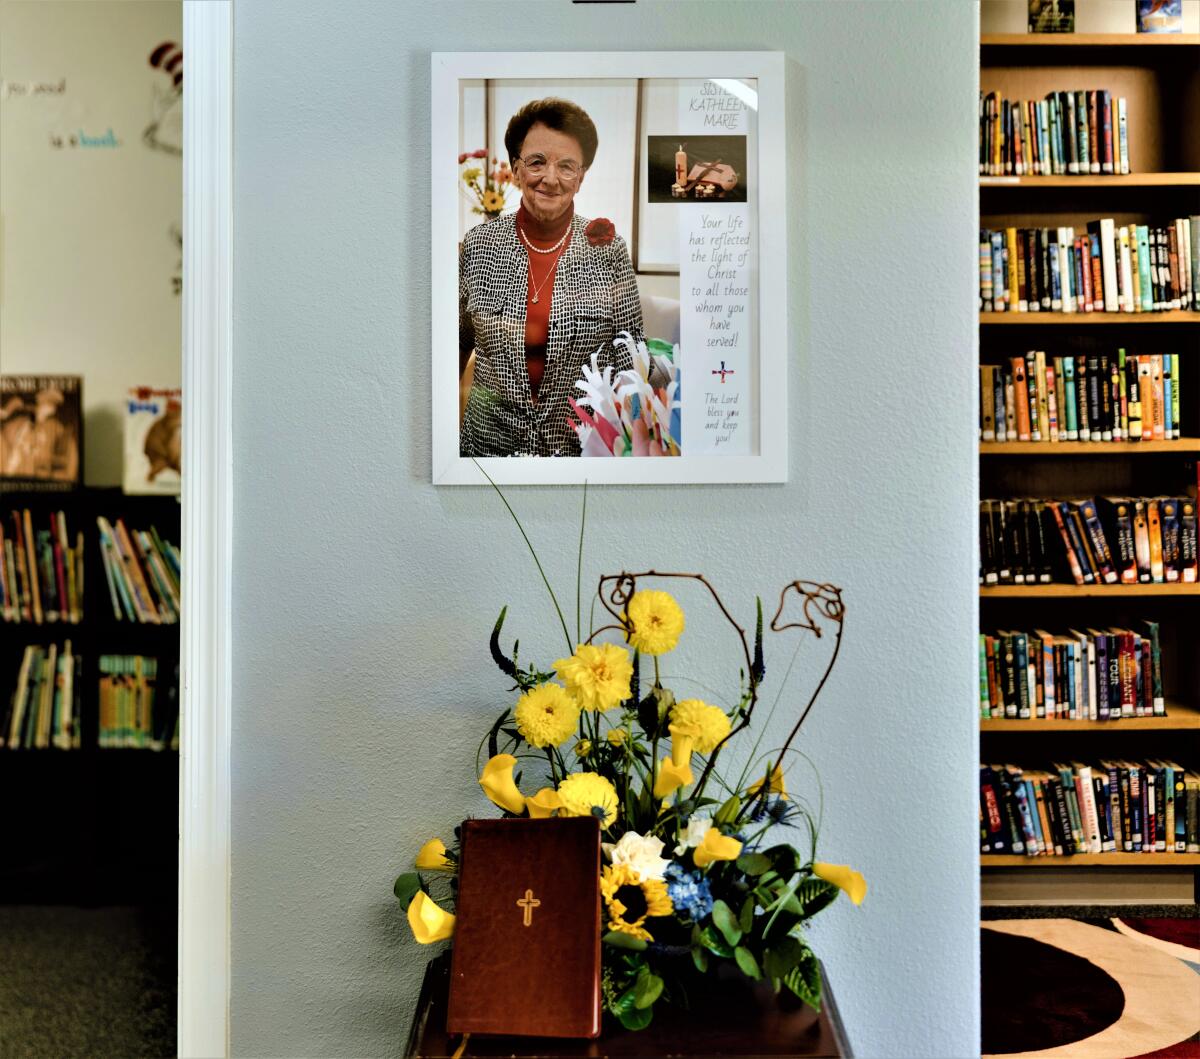 A portrait of Sr. Kathleen Marie Pughe hangs inside a new learning center created in the house in Costa Mesa.